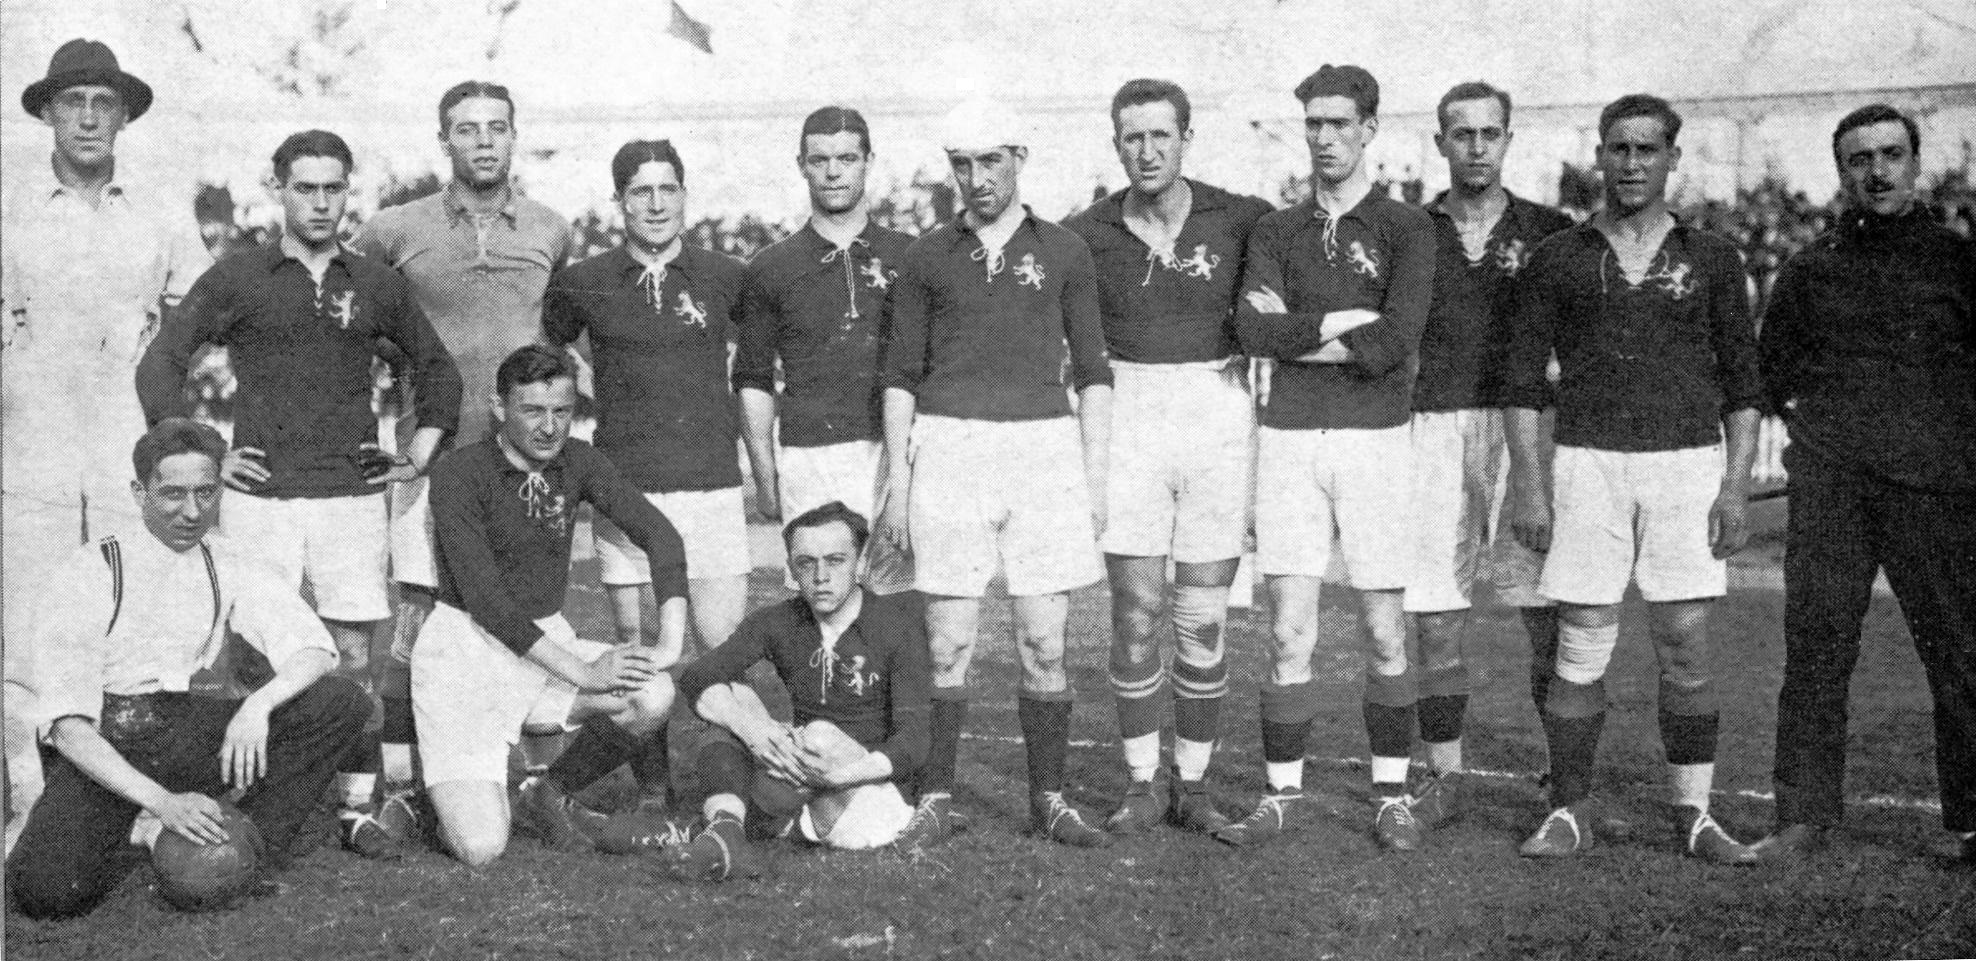 The first Spanish Selection: Silver medal in Antwerp 1920